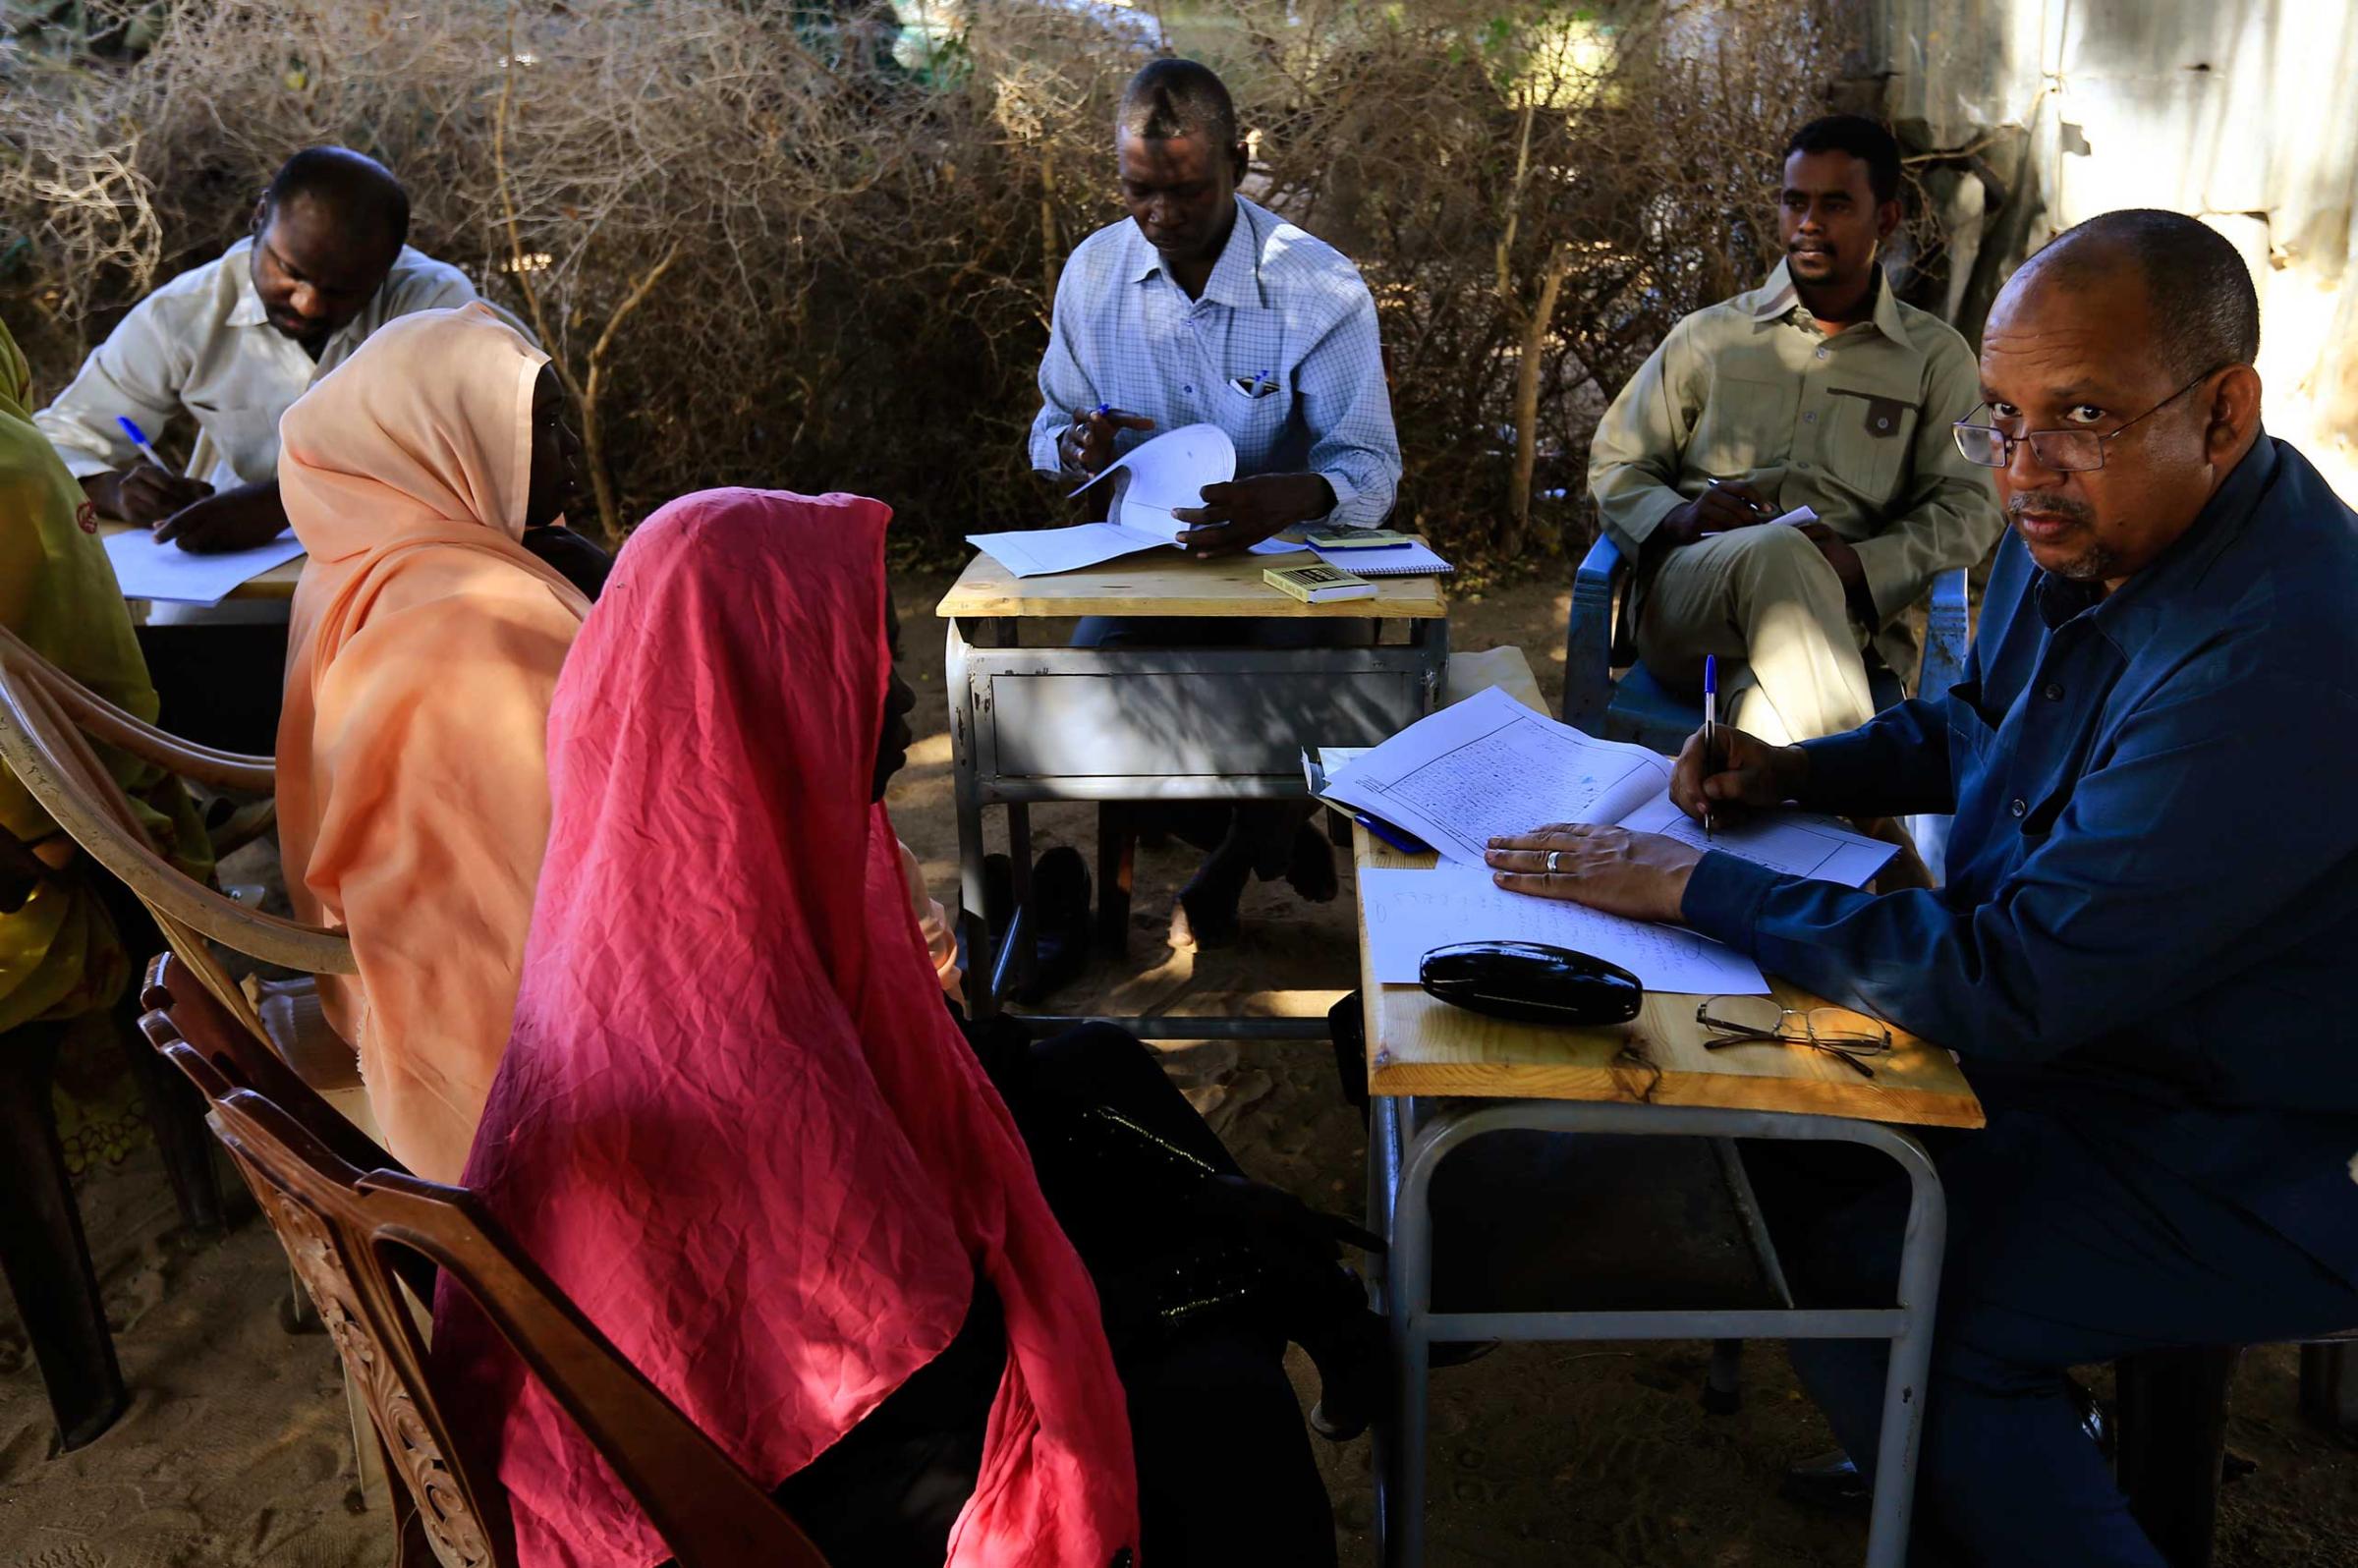 Special Prosecutor for Crimes in Darfur Yasir Ahmed Mohamed and his team talk to women during an investigation into allegations of mass rape in the village of Tabit, in North Darfur, Nov. 20, 2014.